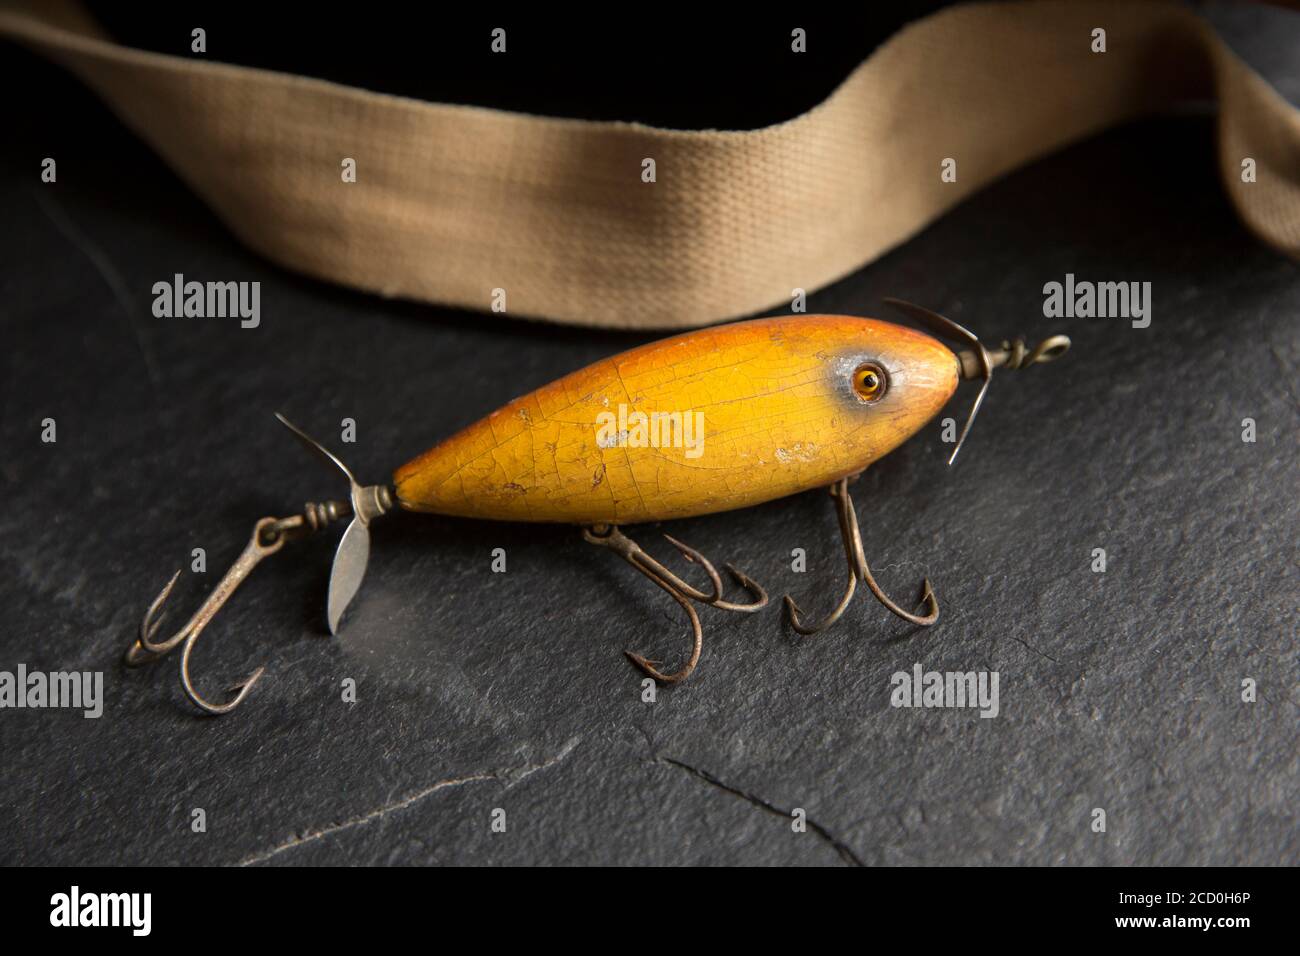 An example of an old South Bend fishing lure, or plug, designed to catch predatory fish displayed on a dark slate background next to an old whicker ta Stock Photo